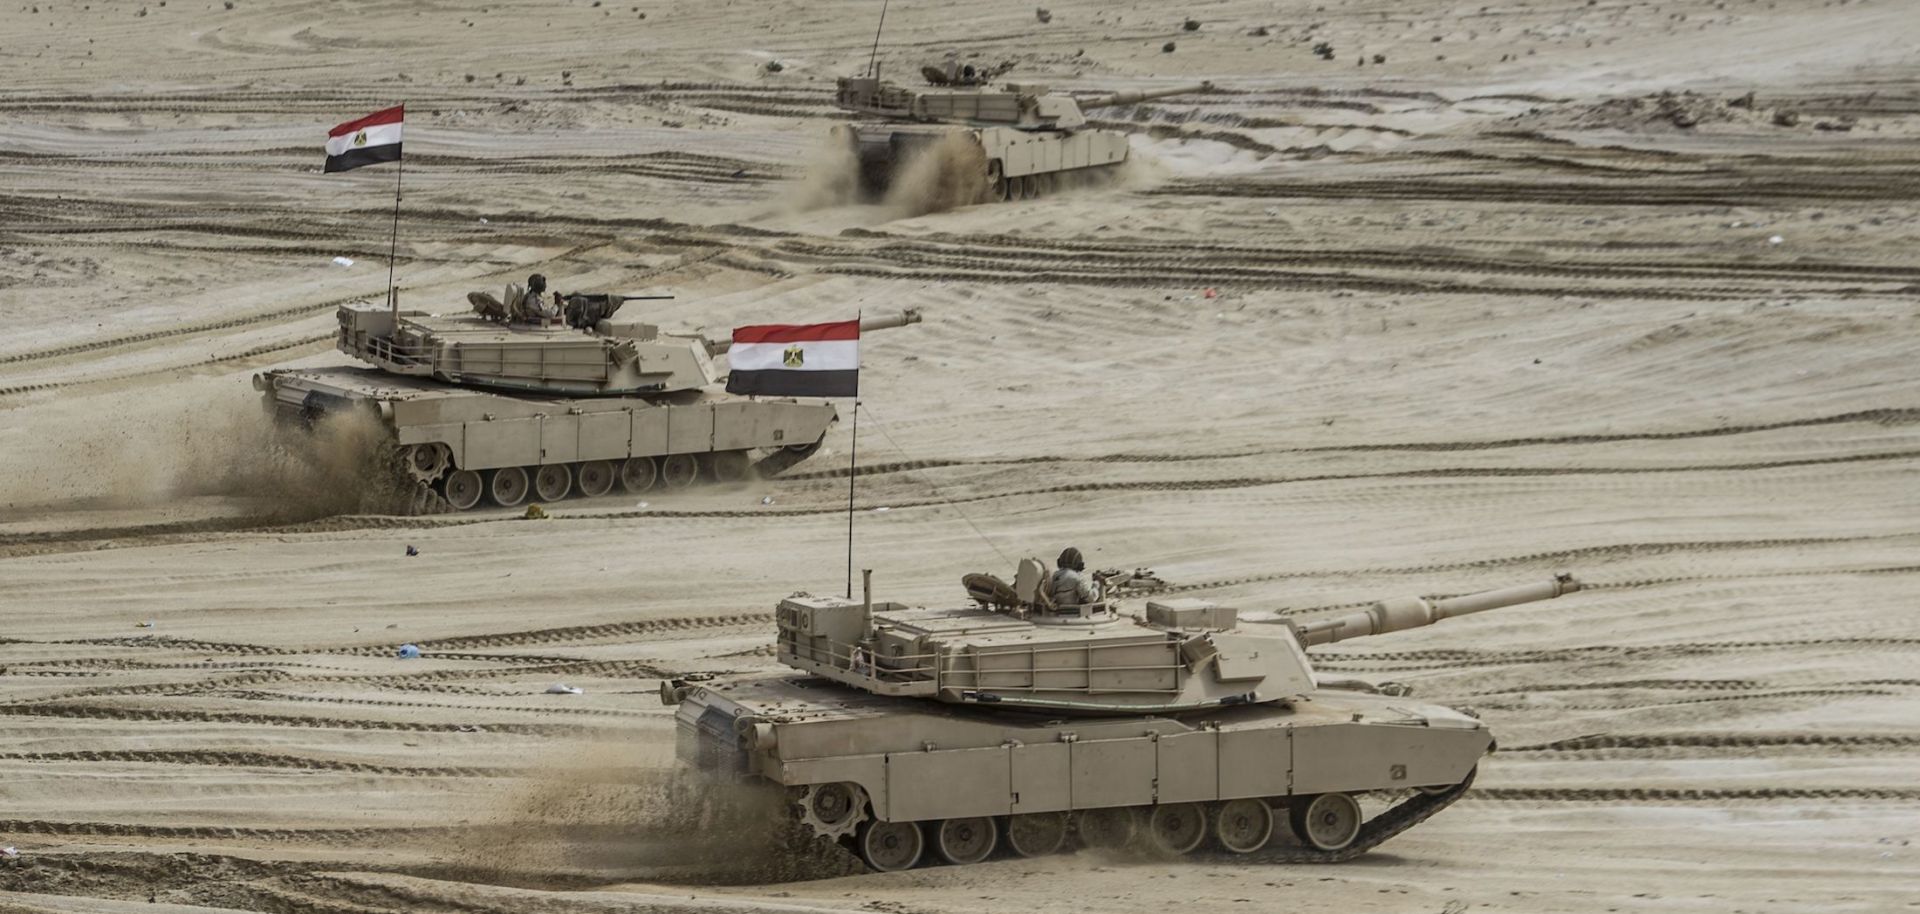 Egyptian tanks take part in joint military exercises at a base near the Mediterranean coast, located northwest of the capital of Cairo, on Nov. 15, 2018. 